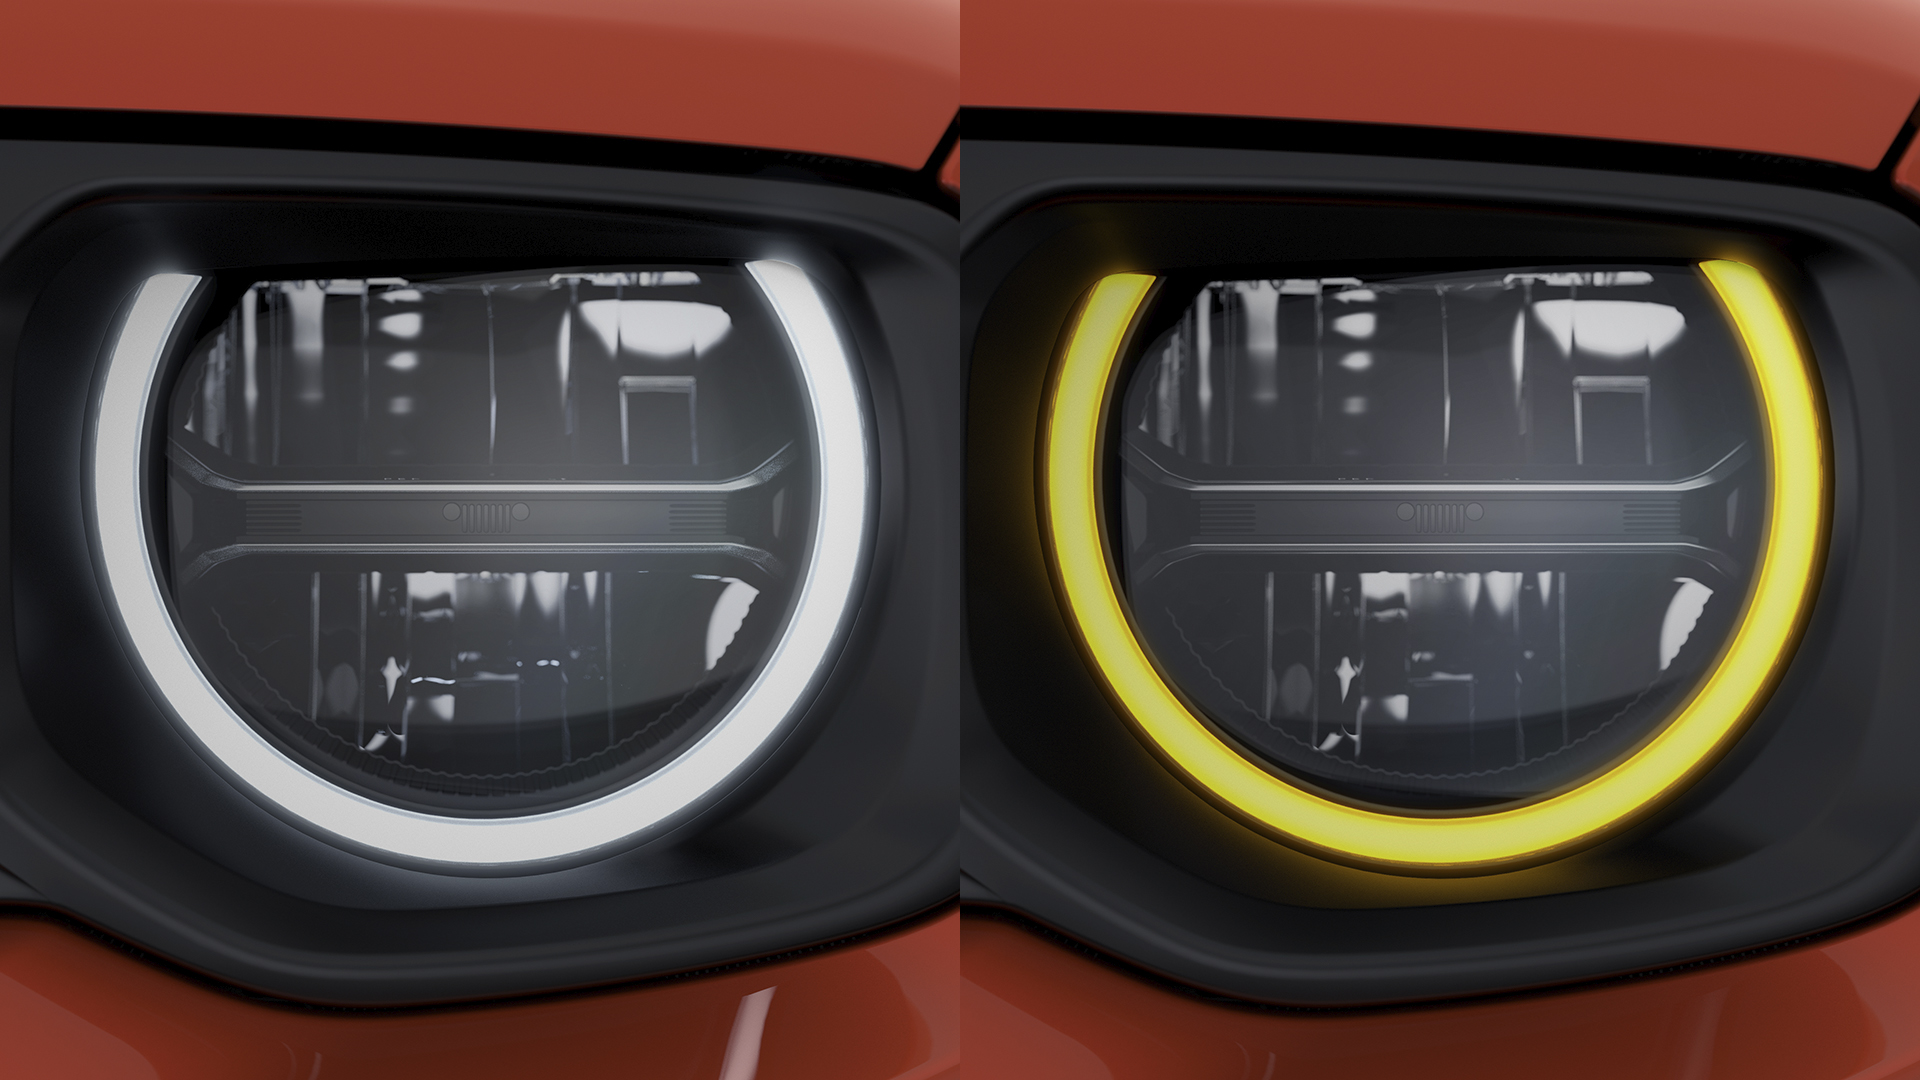 New headlamps with LED technology, with turning and beacon lights integrated into a single peripheral light beam